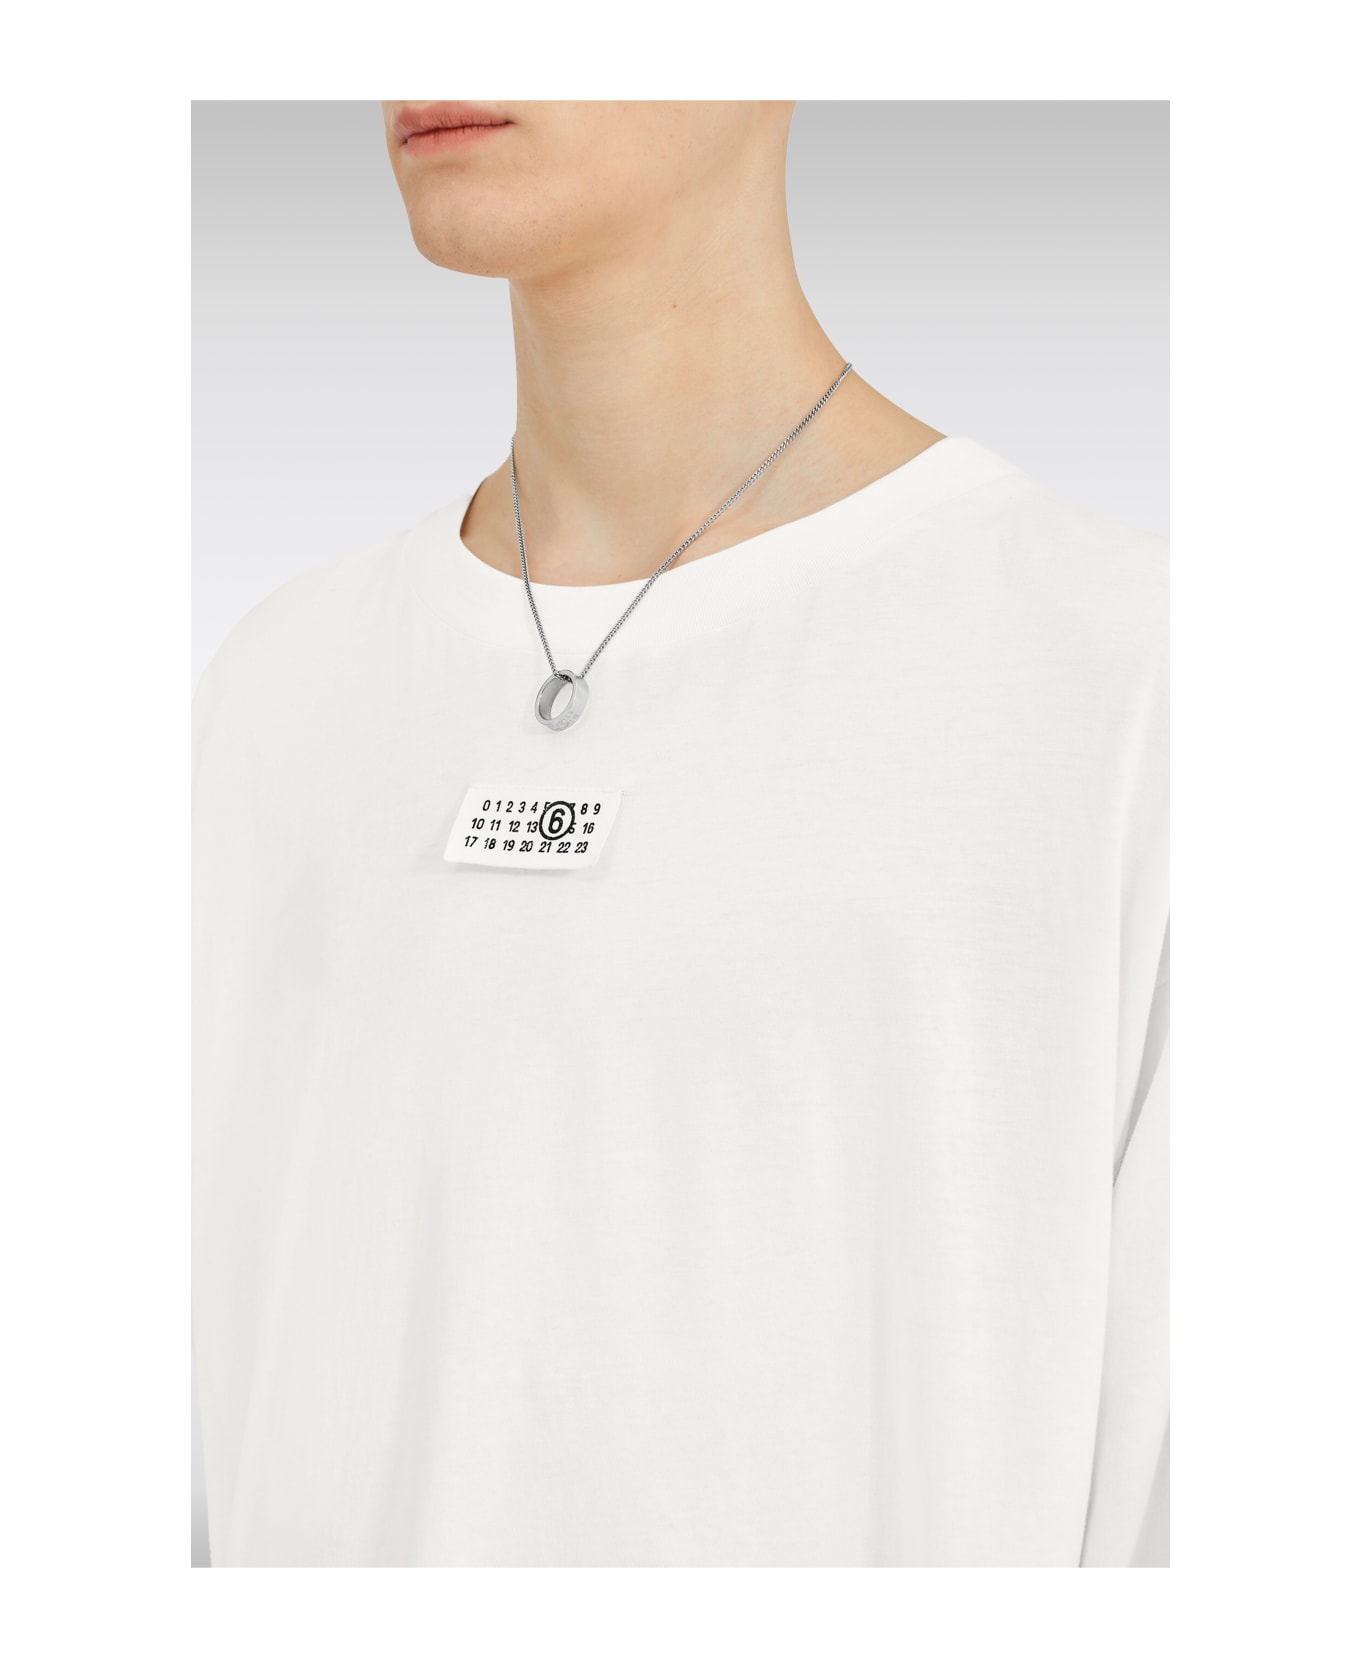 MM6 Maison Margiela T-shirt White cotton t-shirt with long sleeves and front logo tag - Bianco シャツ